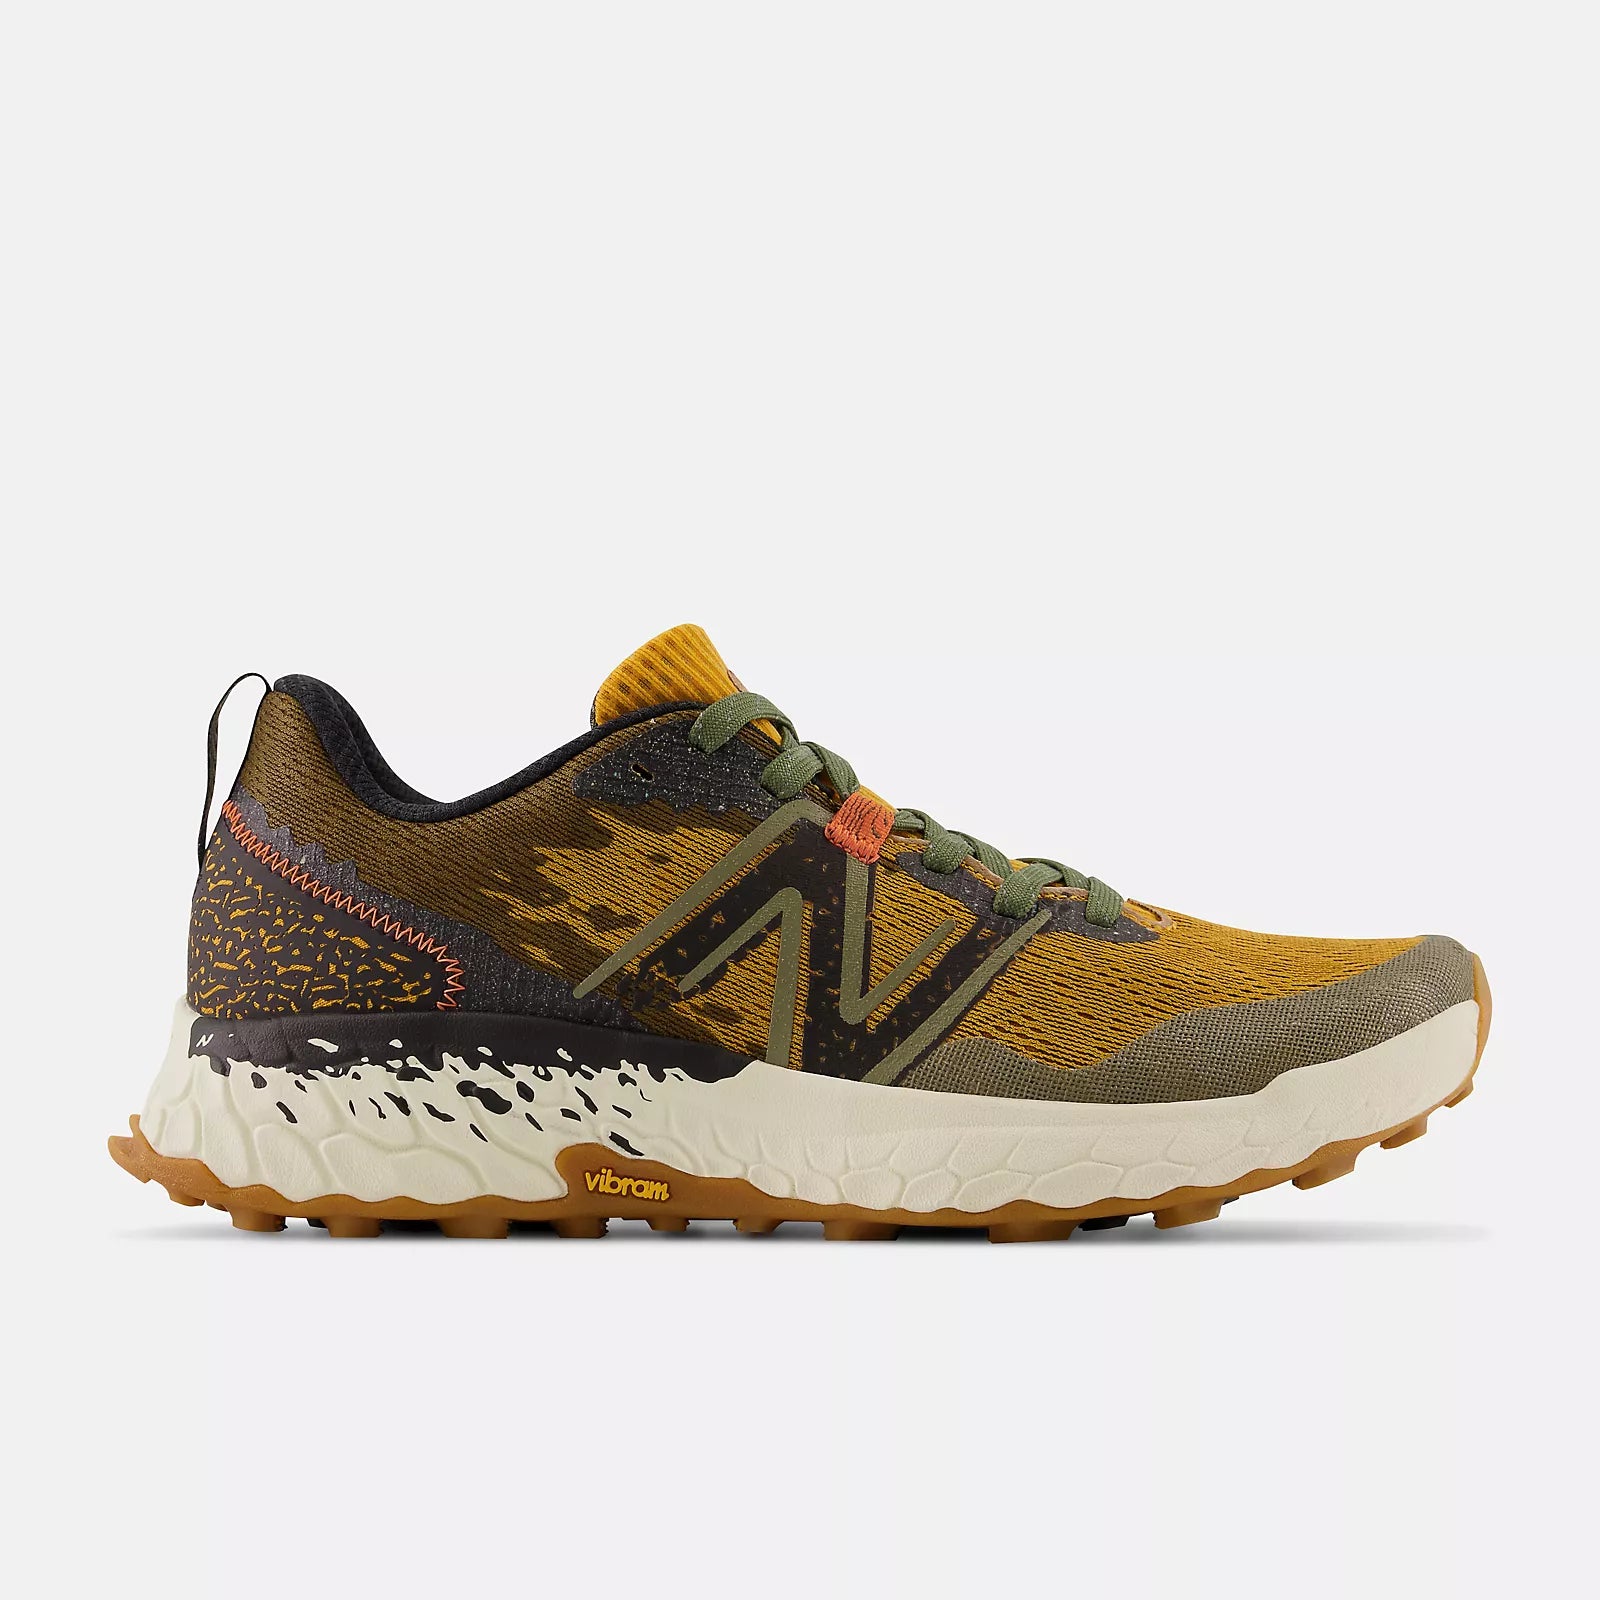 Lateral view of the Men's Hierro V7 trail runner by New Balance in the color Golden hour/Dark Camo/Black